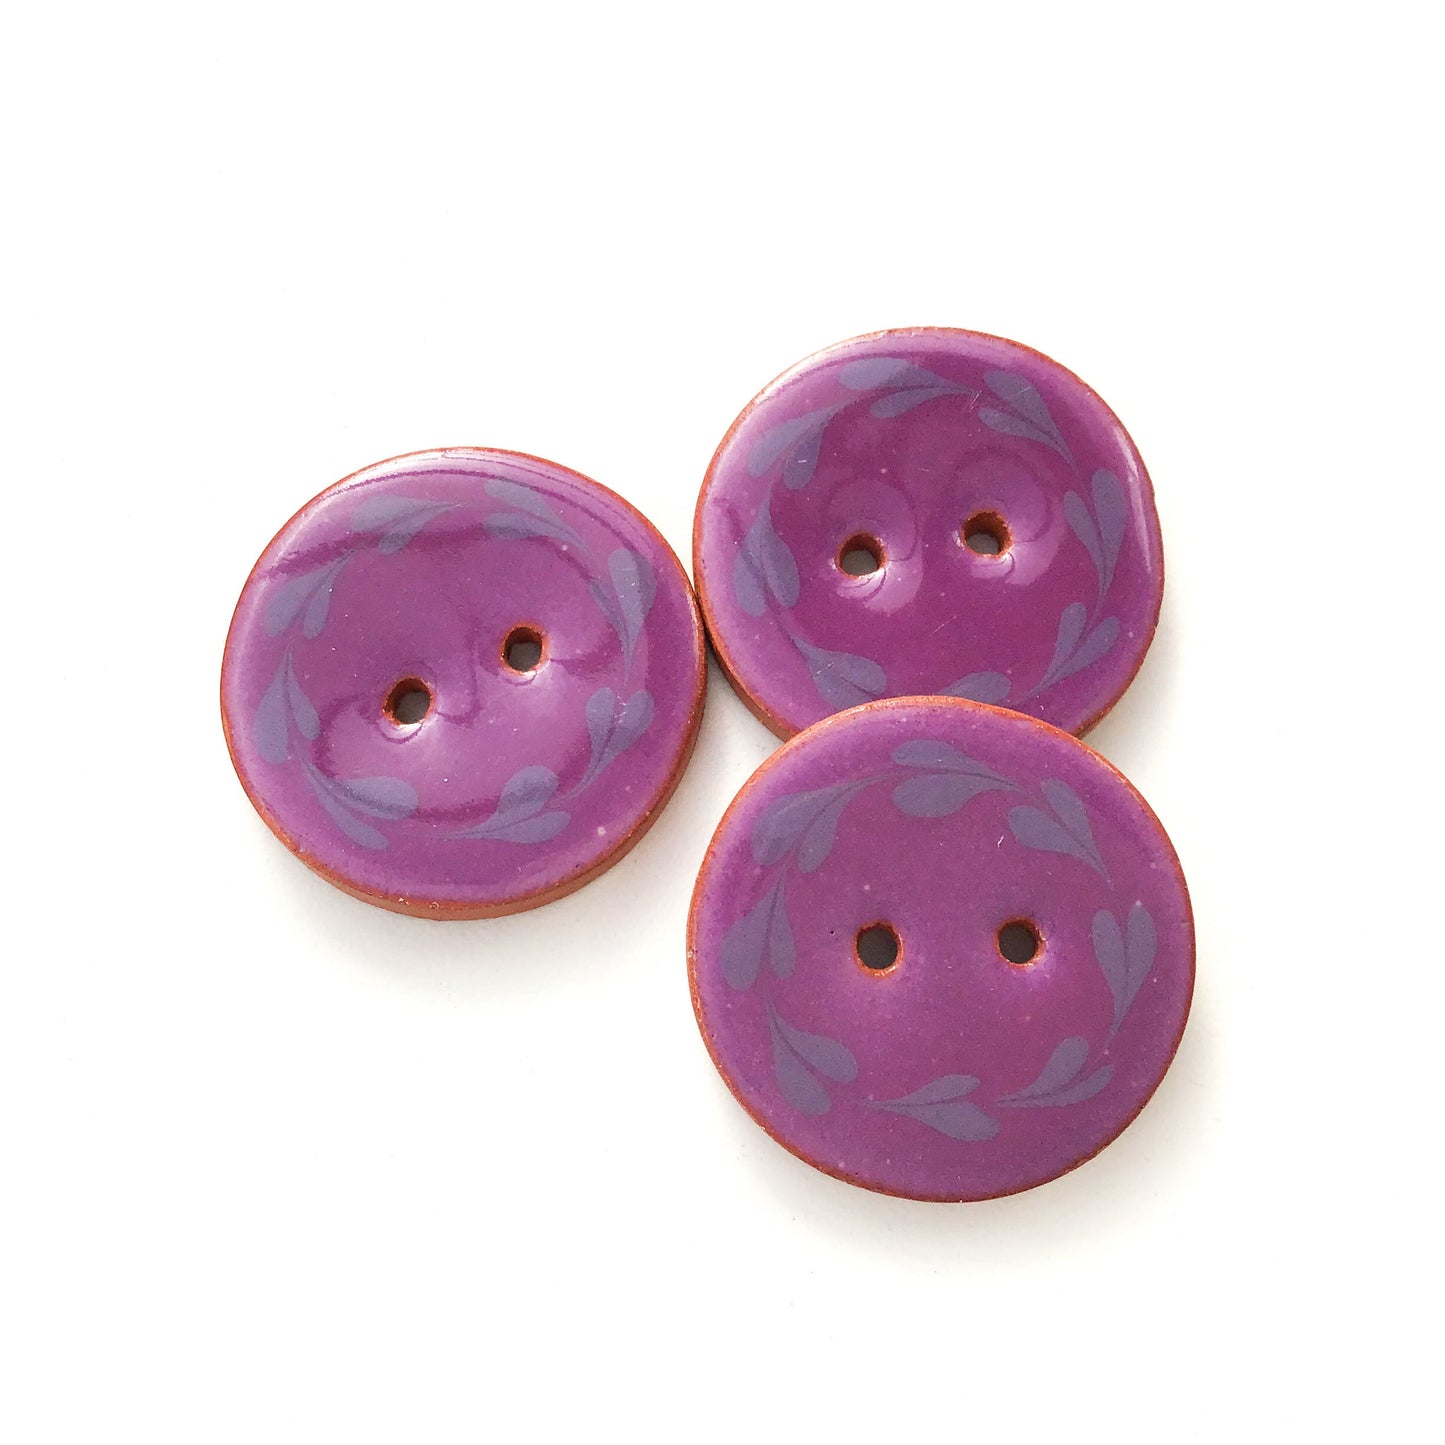 Purple Floral Wreath Ceramic Buttons on Terracotta Clay - 1 1/16" - 3 Pack